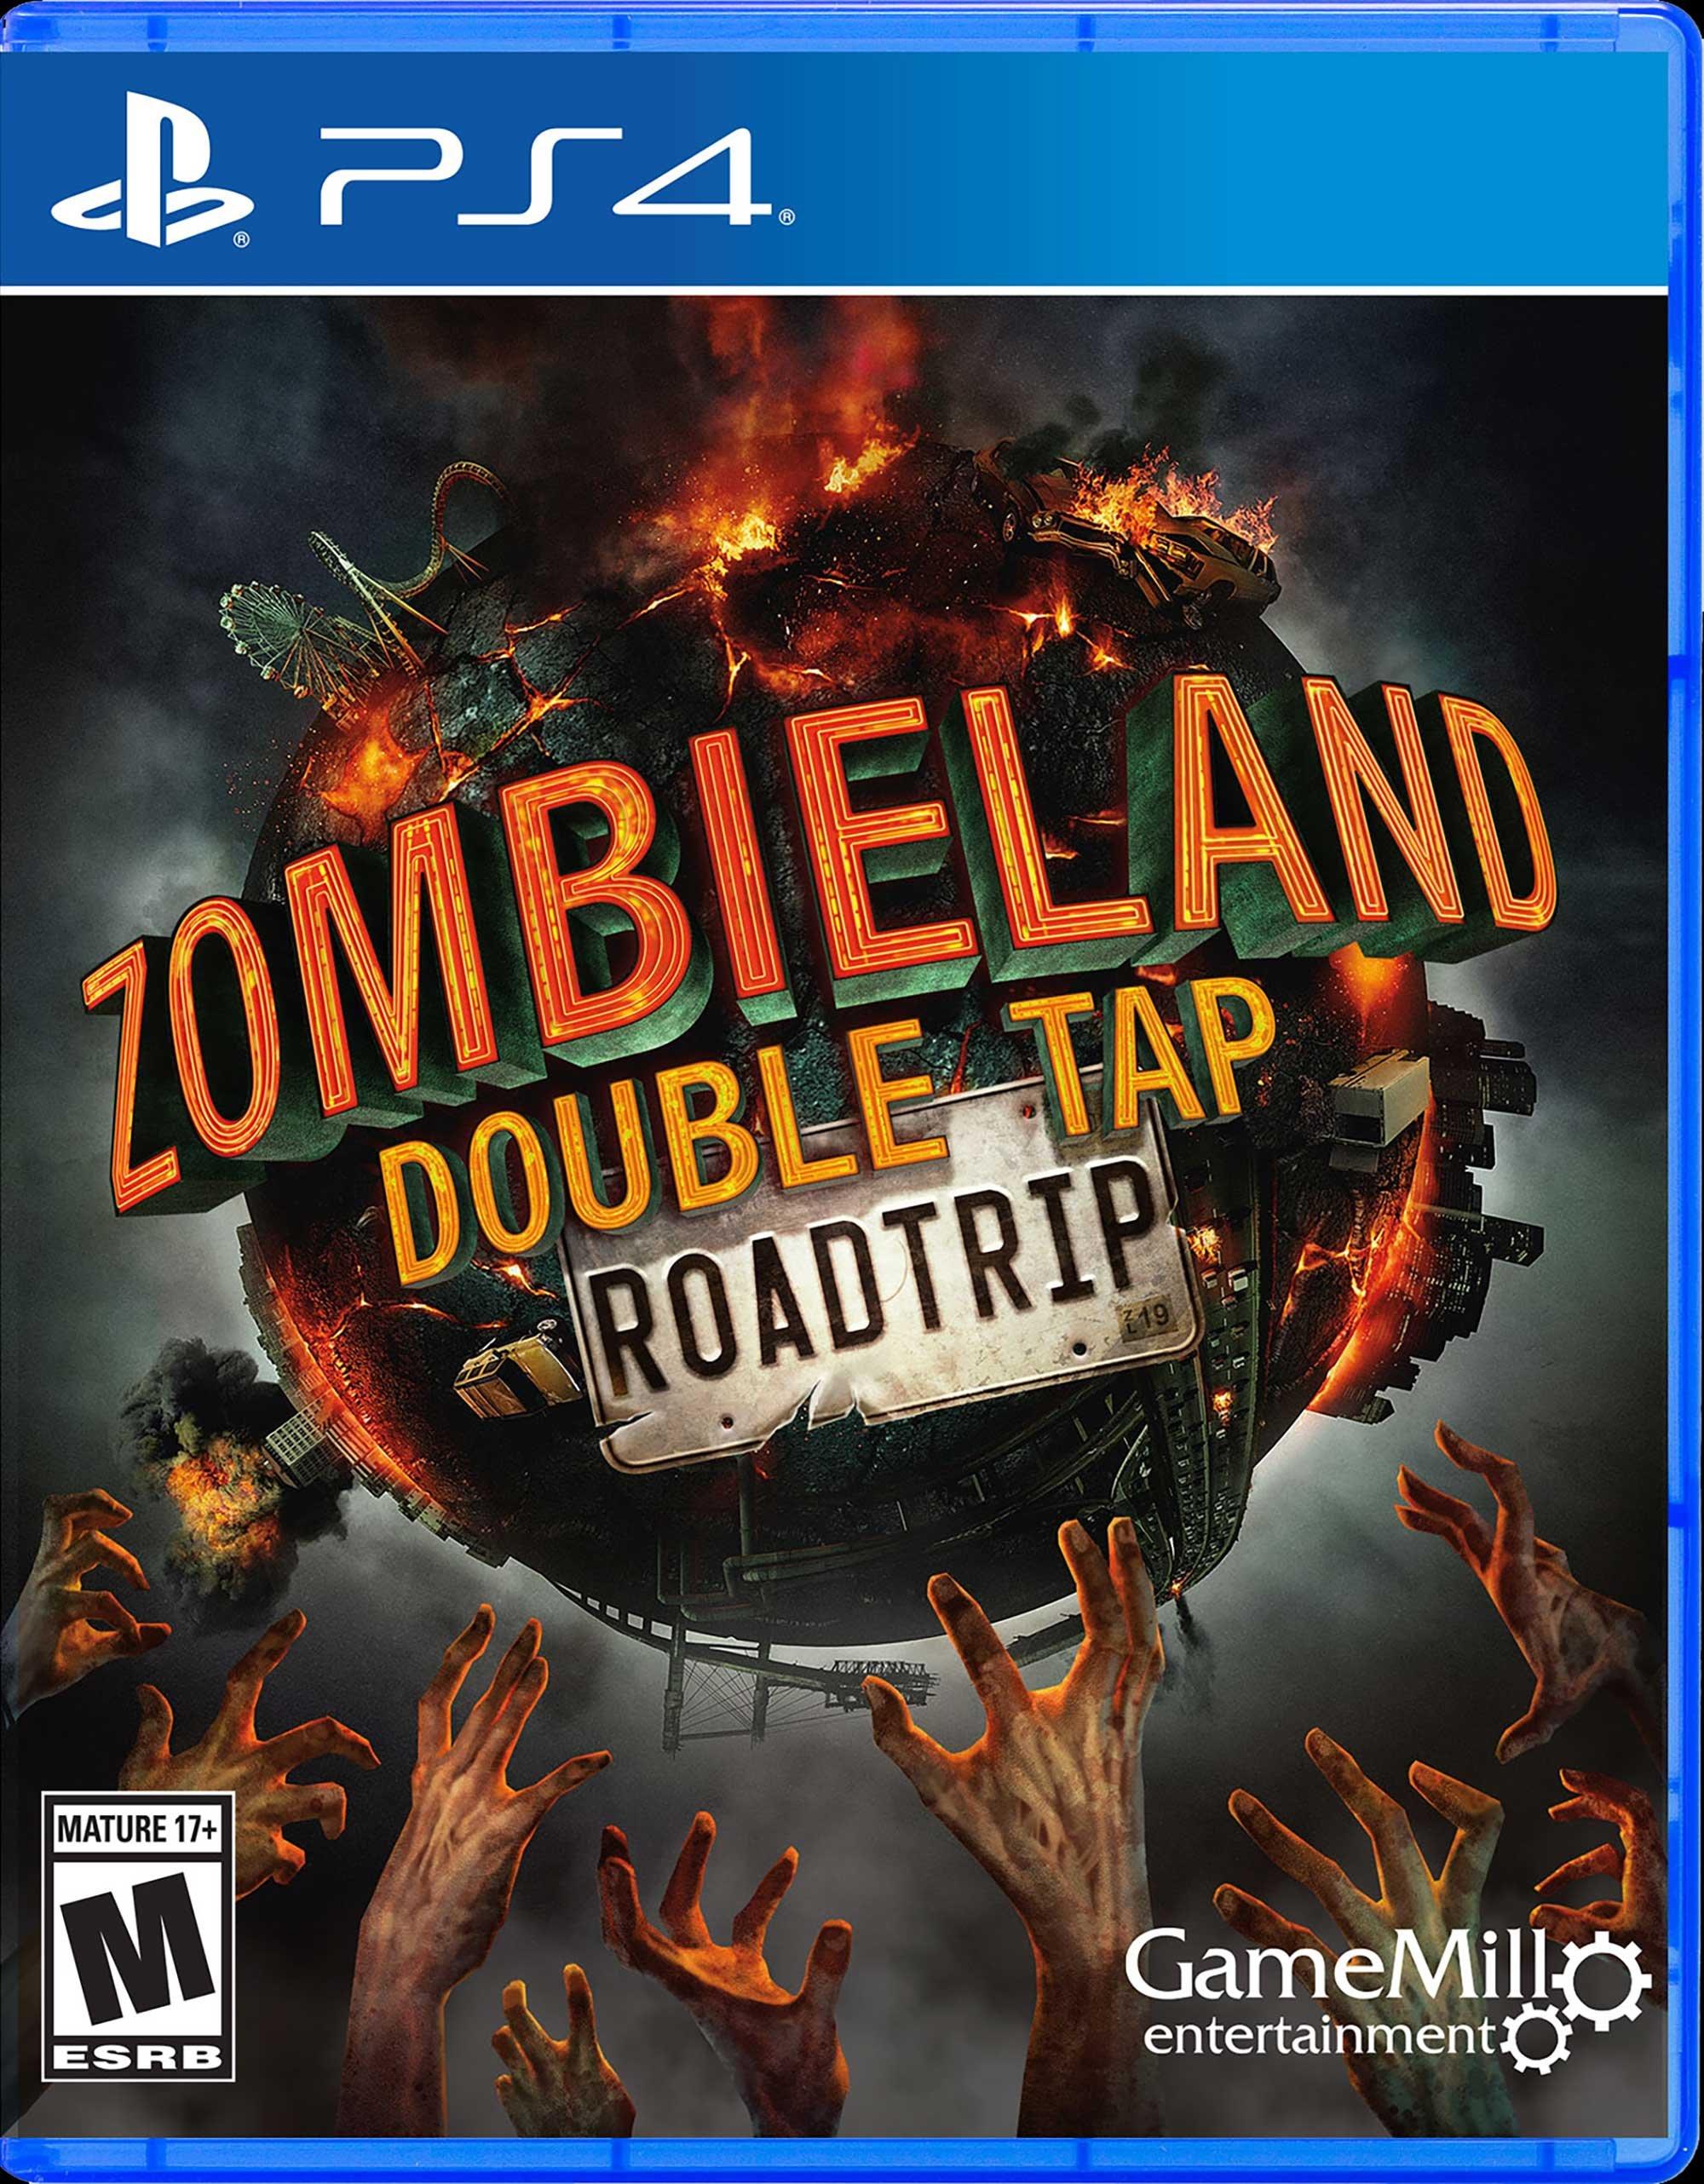 zombie games on playstation 4